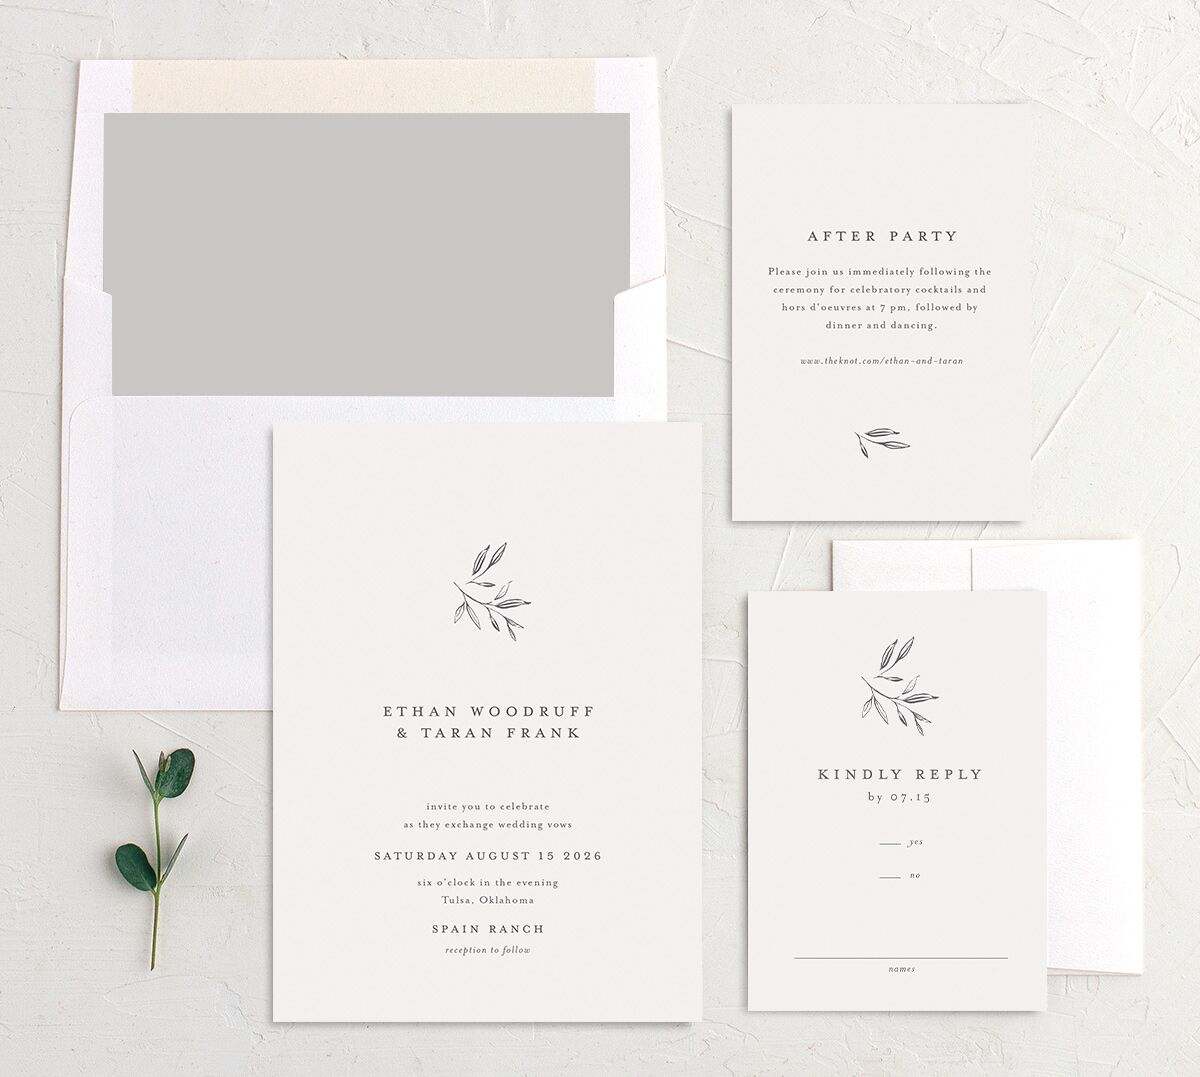 Simply Timeless Wedding Invitations suite in grey